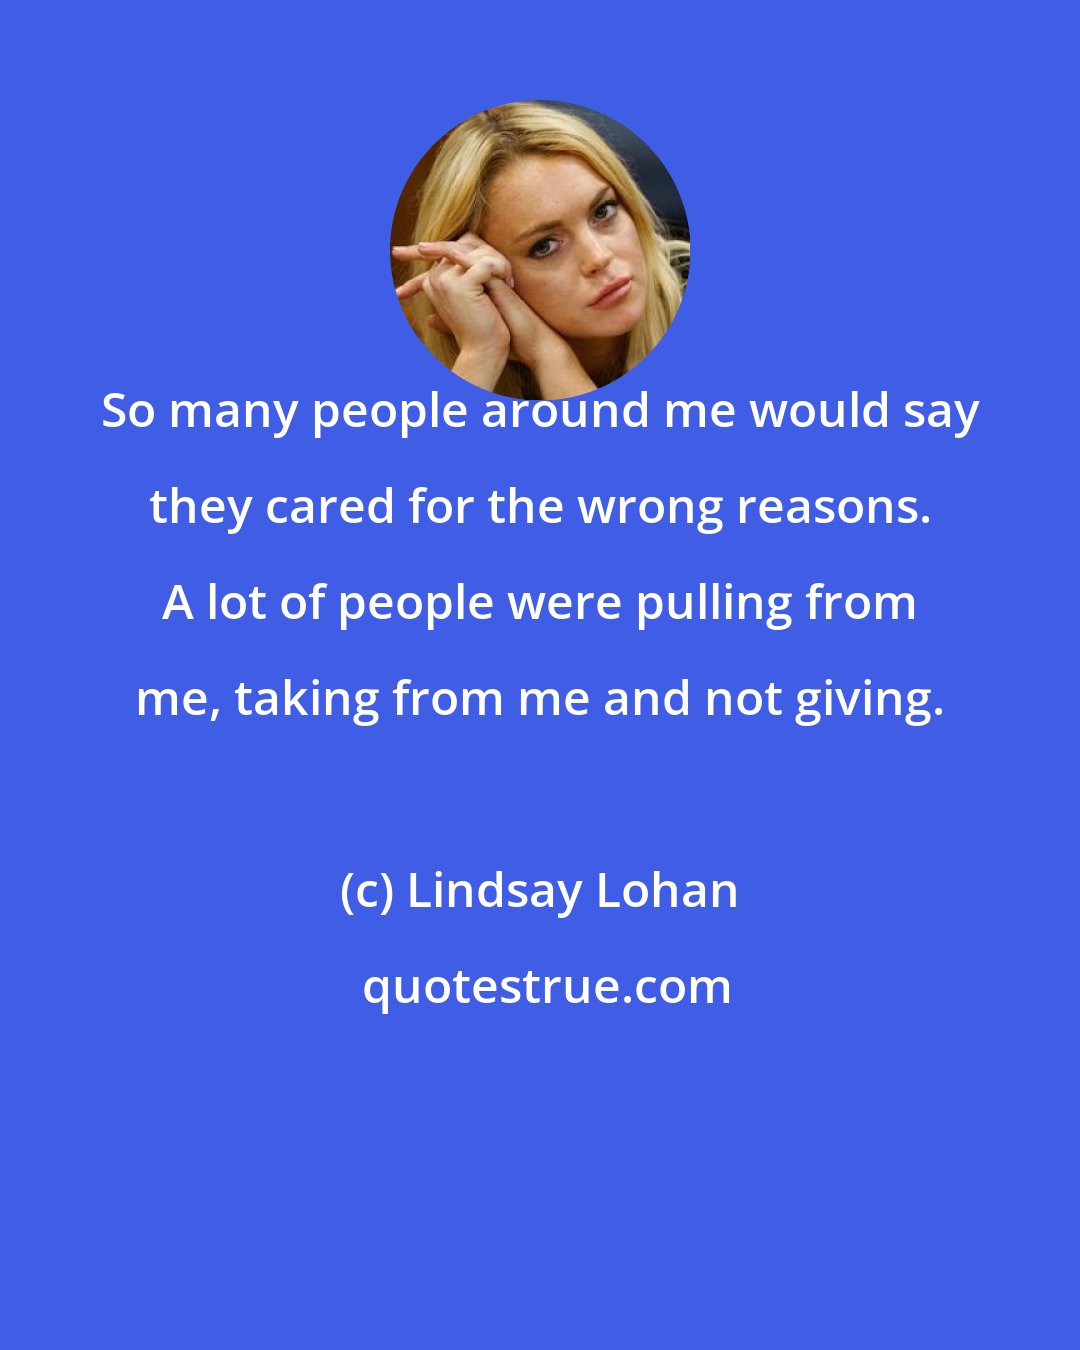 Lindsay Lohan: So many people around me would say they cared for the wrong reasons. A lot of people were pulling from me, taking from me and not giving.